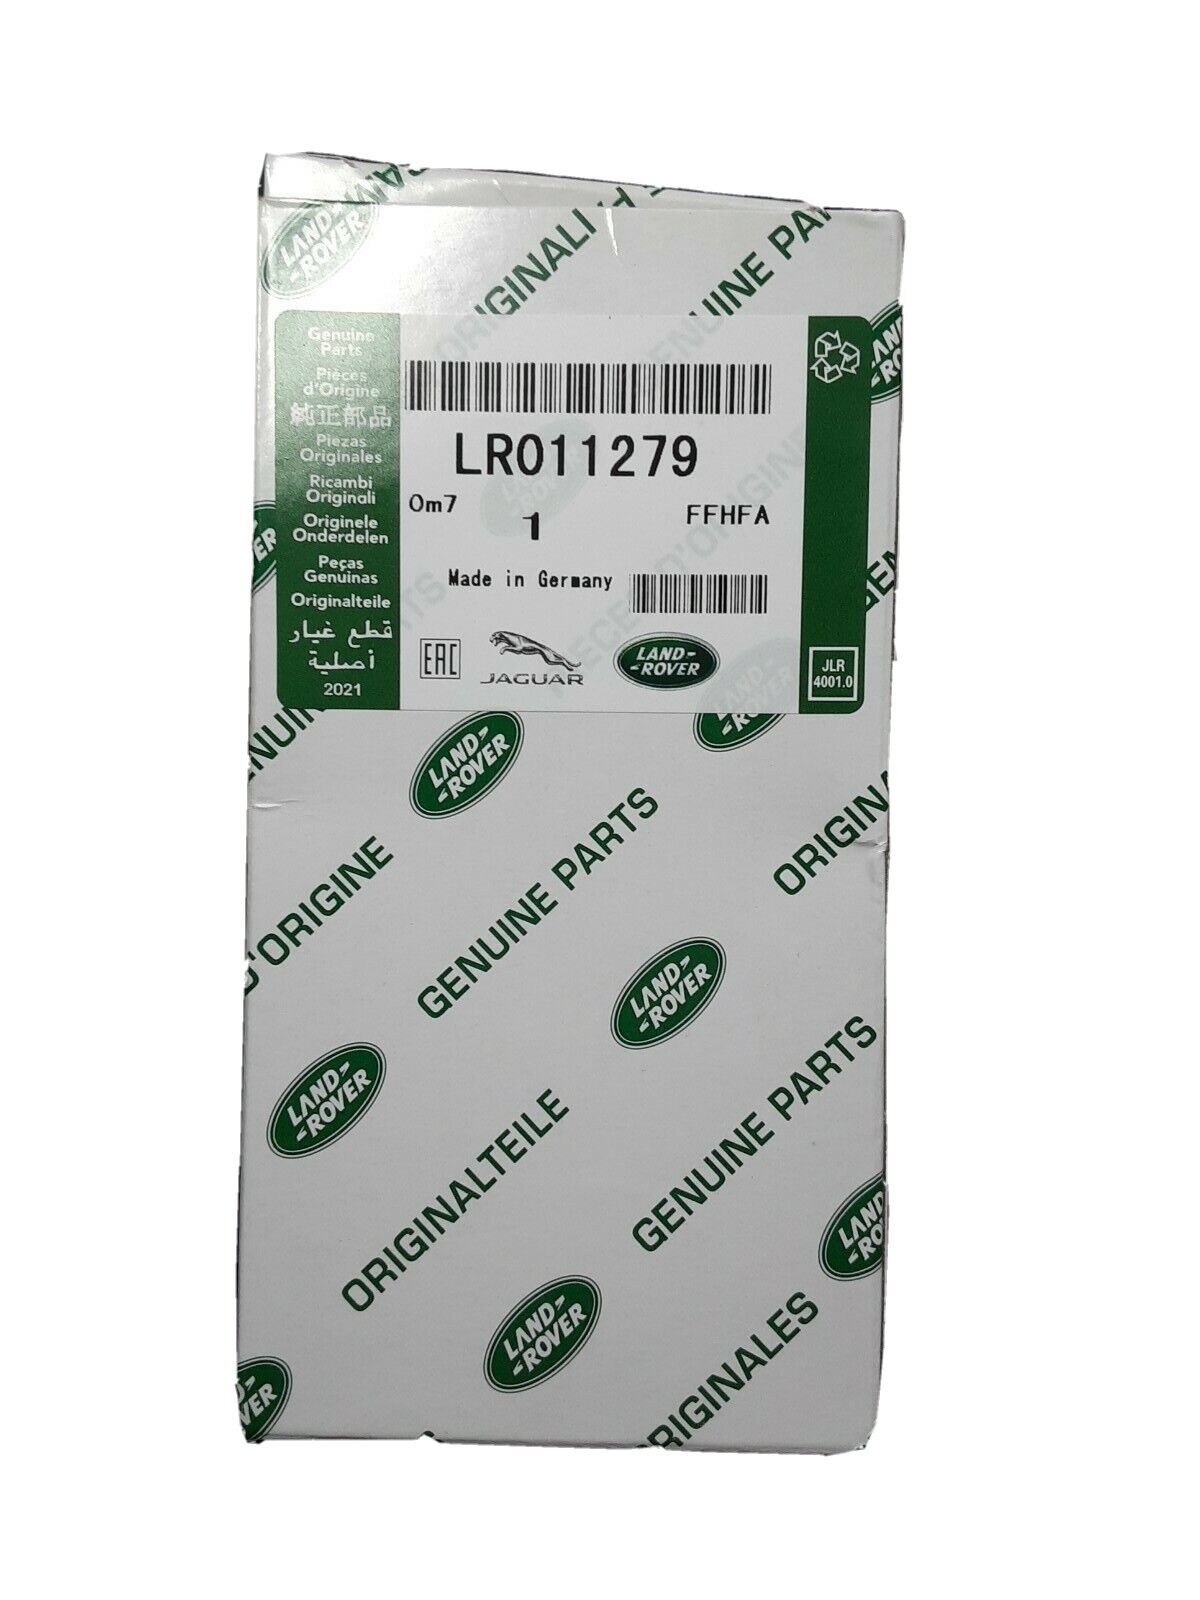 OE Genuine Land-Rover Oil Filter LR011279 Buy the Real Deal - ***4 Pack*****